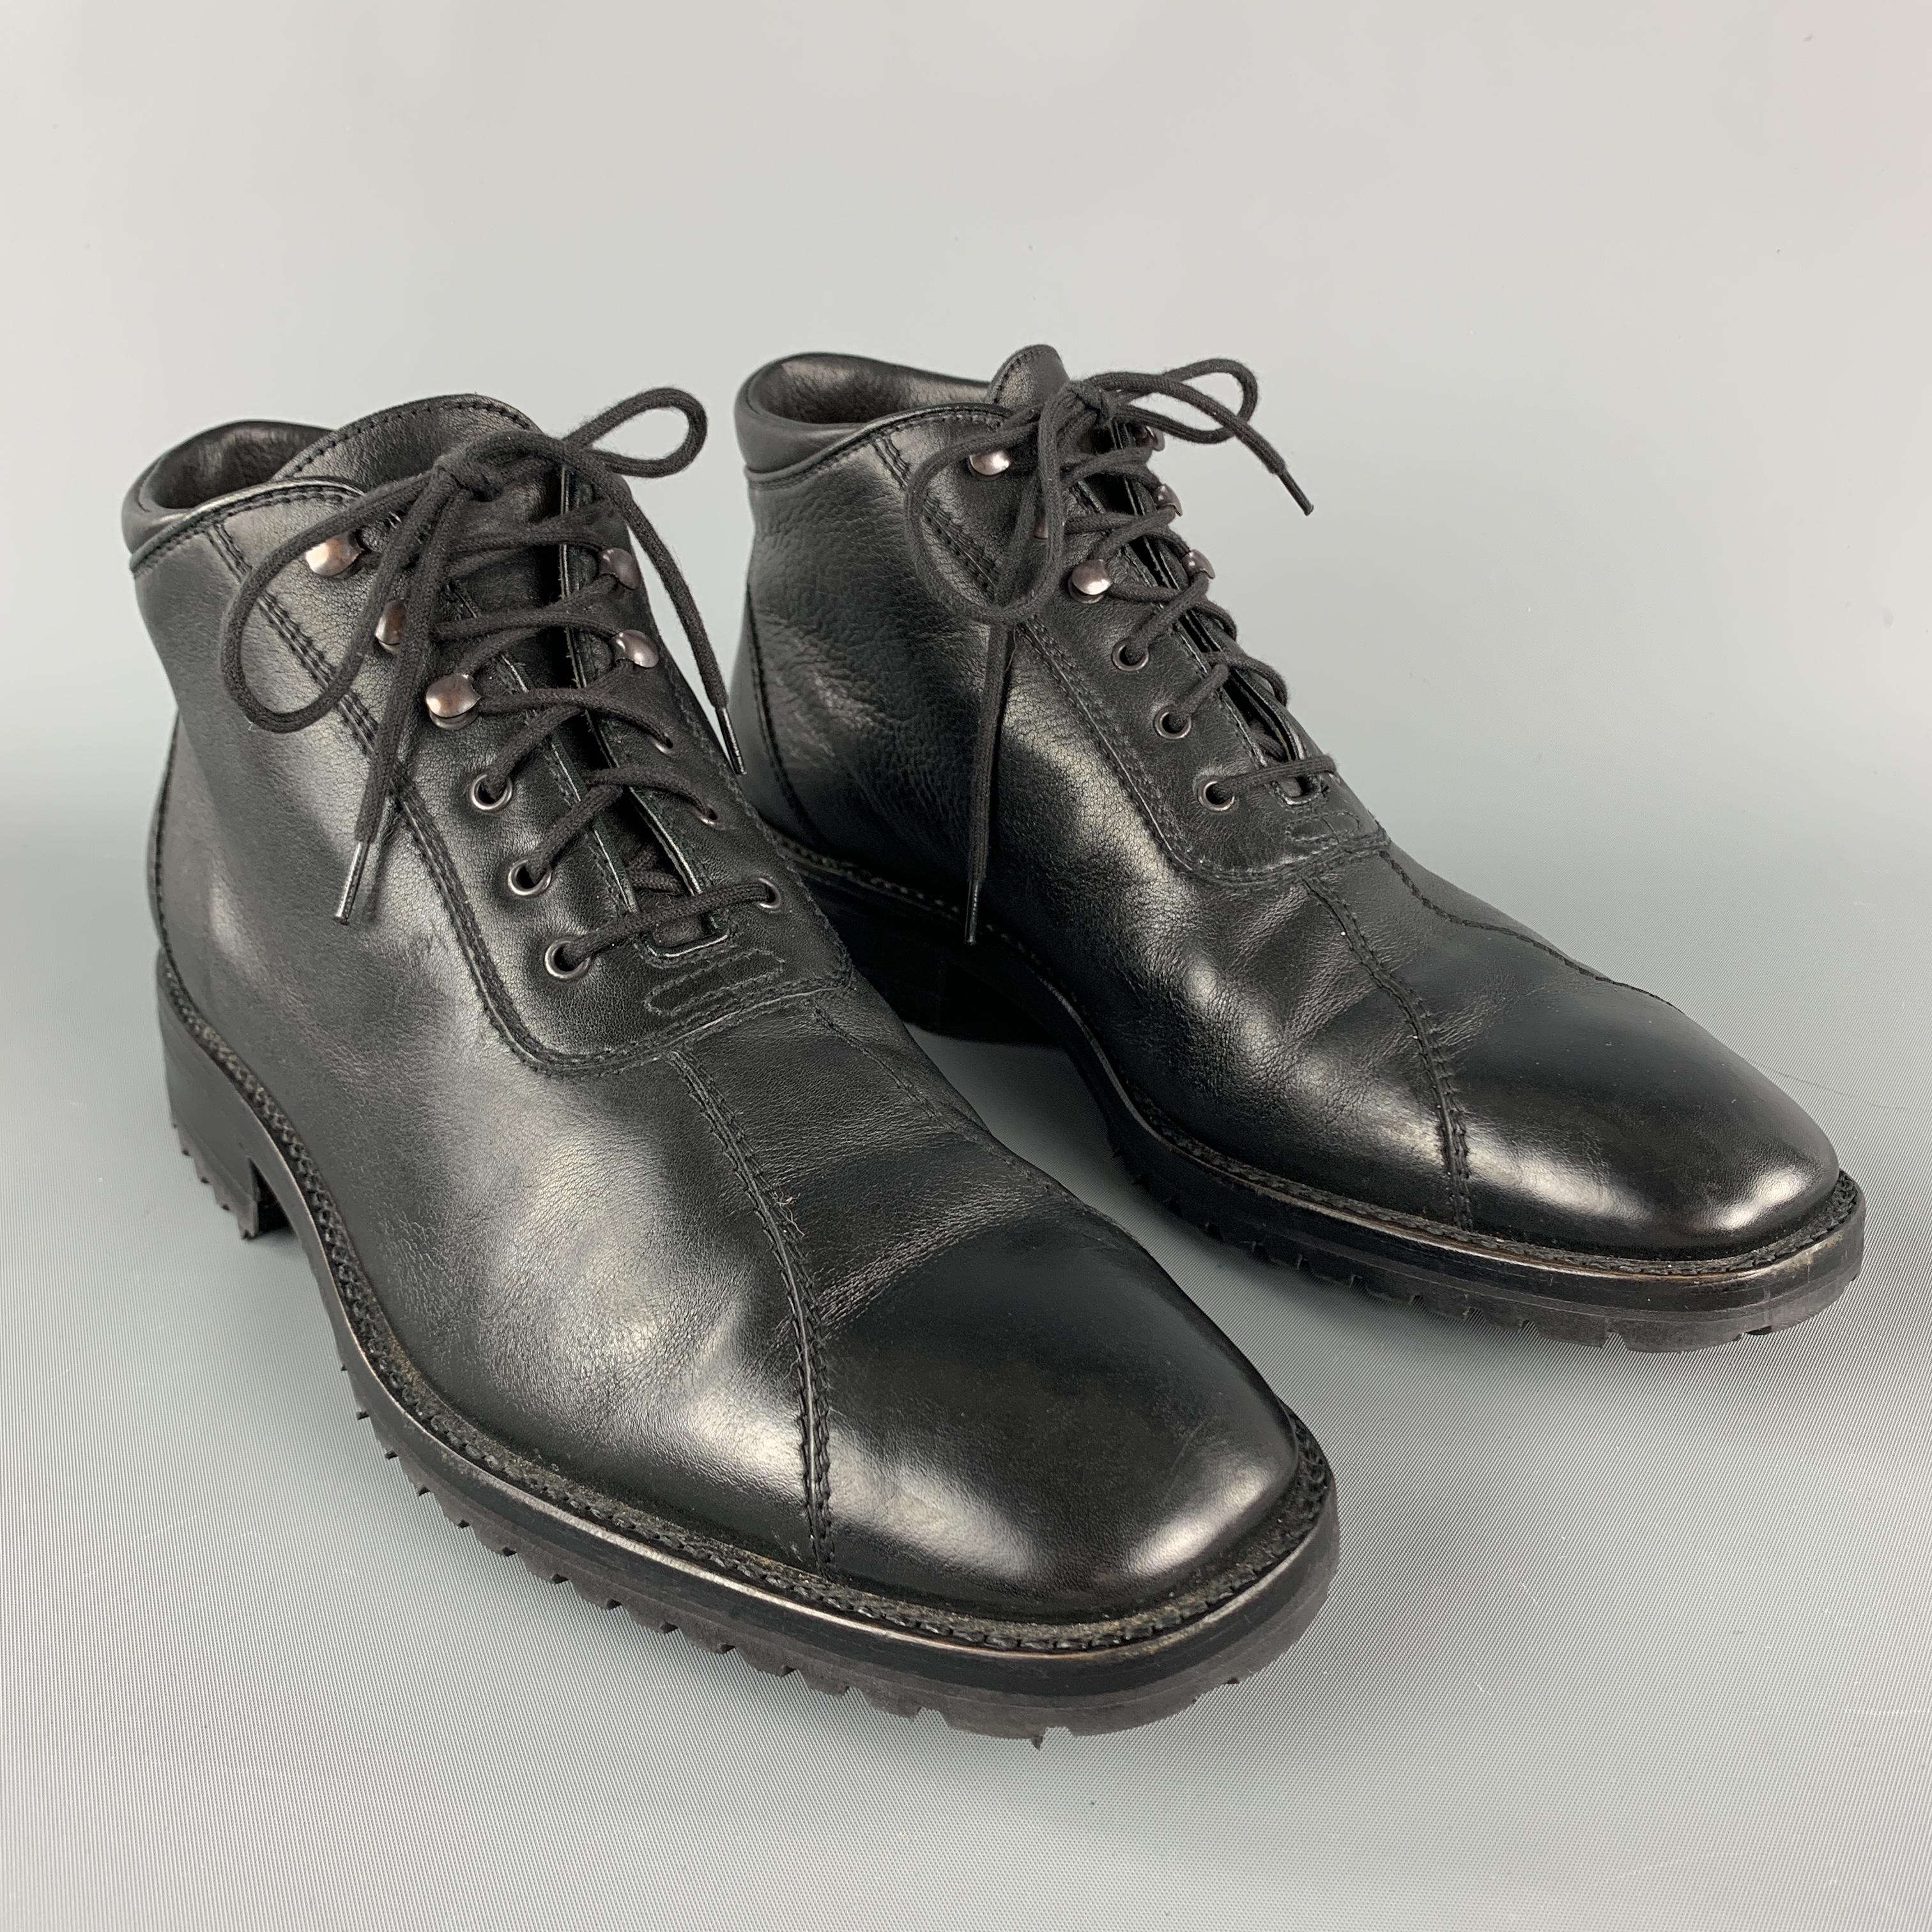 GRAVATI  by ARTHUR BEREN Ankle Boots comes in a solid black leather material, with stitches at top, a rubber sole, lace up. Made in Italy.

Excellent Pre-Owned Condition.
Marked: 8 1/2

Outsole: 11.5 x 4 in.
